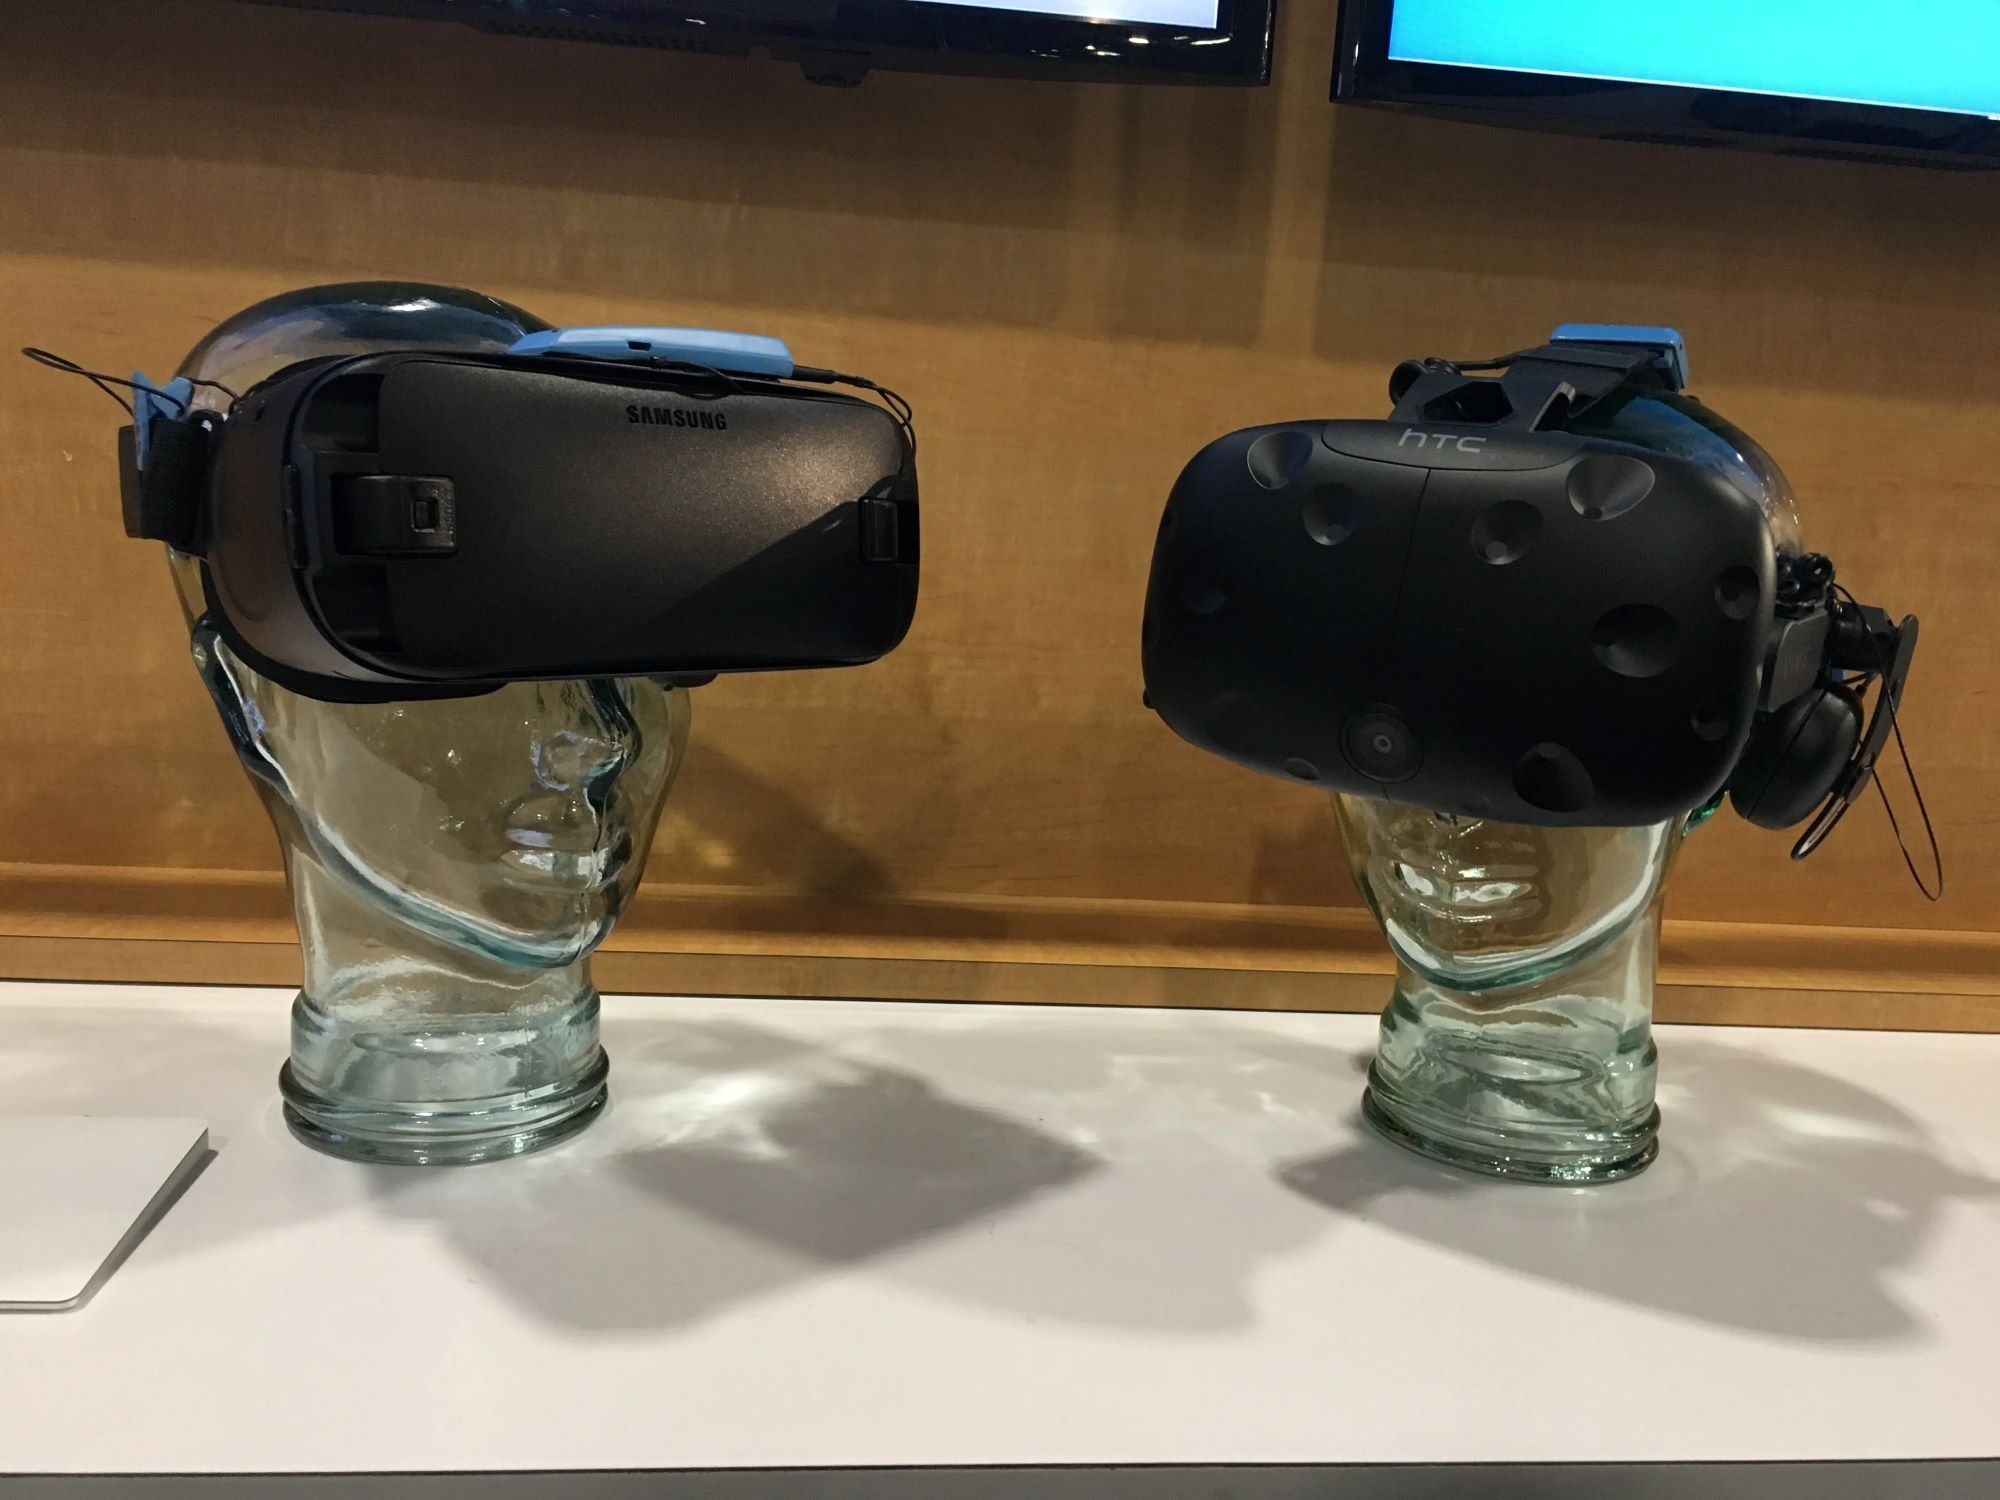 What Makes HTC Vive Better Than Gear VR